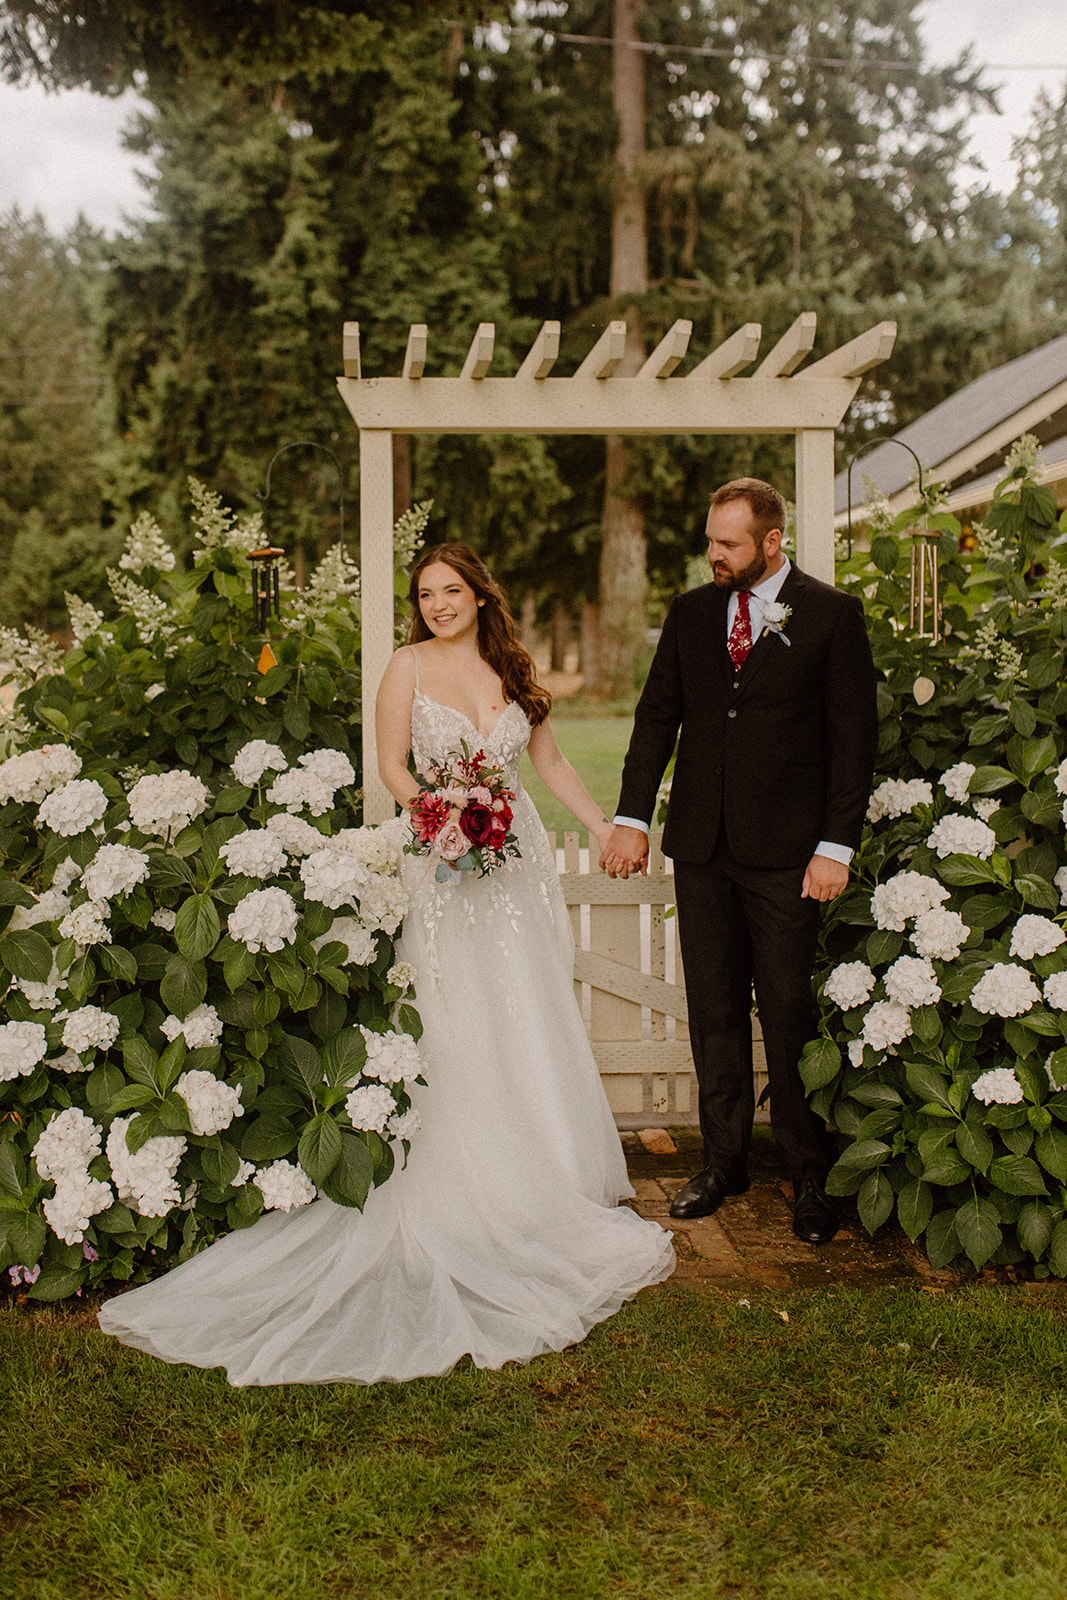 Bride and Groom in Garden for wedding day portraits questions for wedding vendors